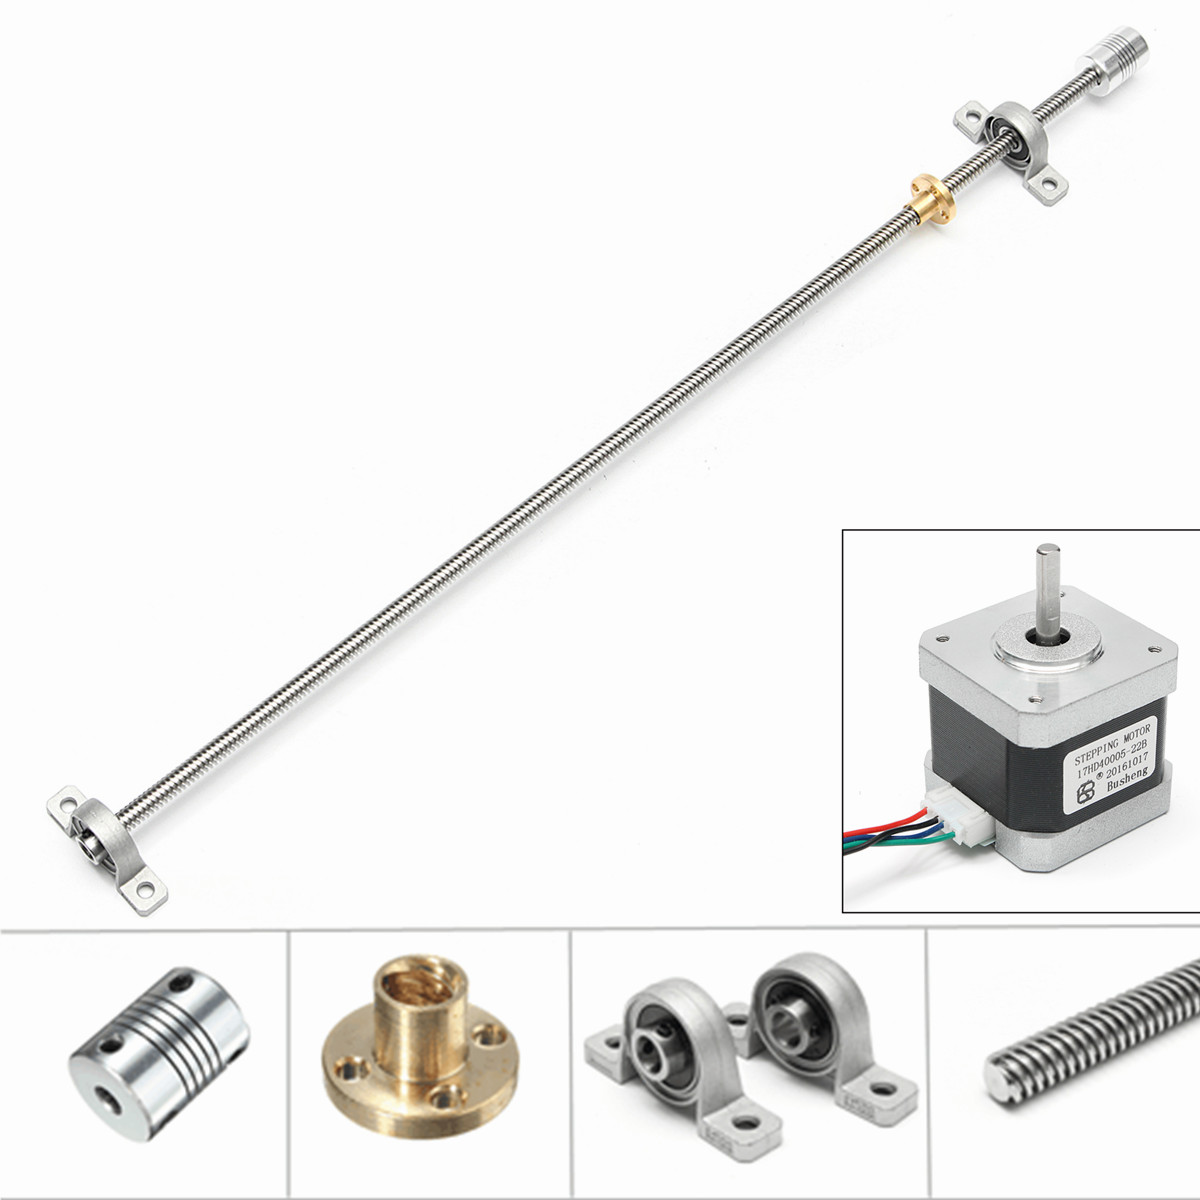 T8 600mm Stainless Steel Lead Screw Coupling Shaft Mounting + Motor For 3D Printer 27